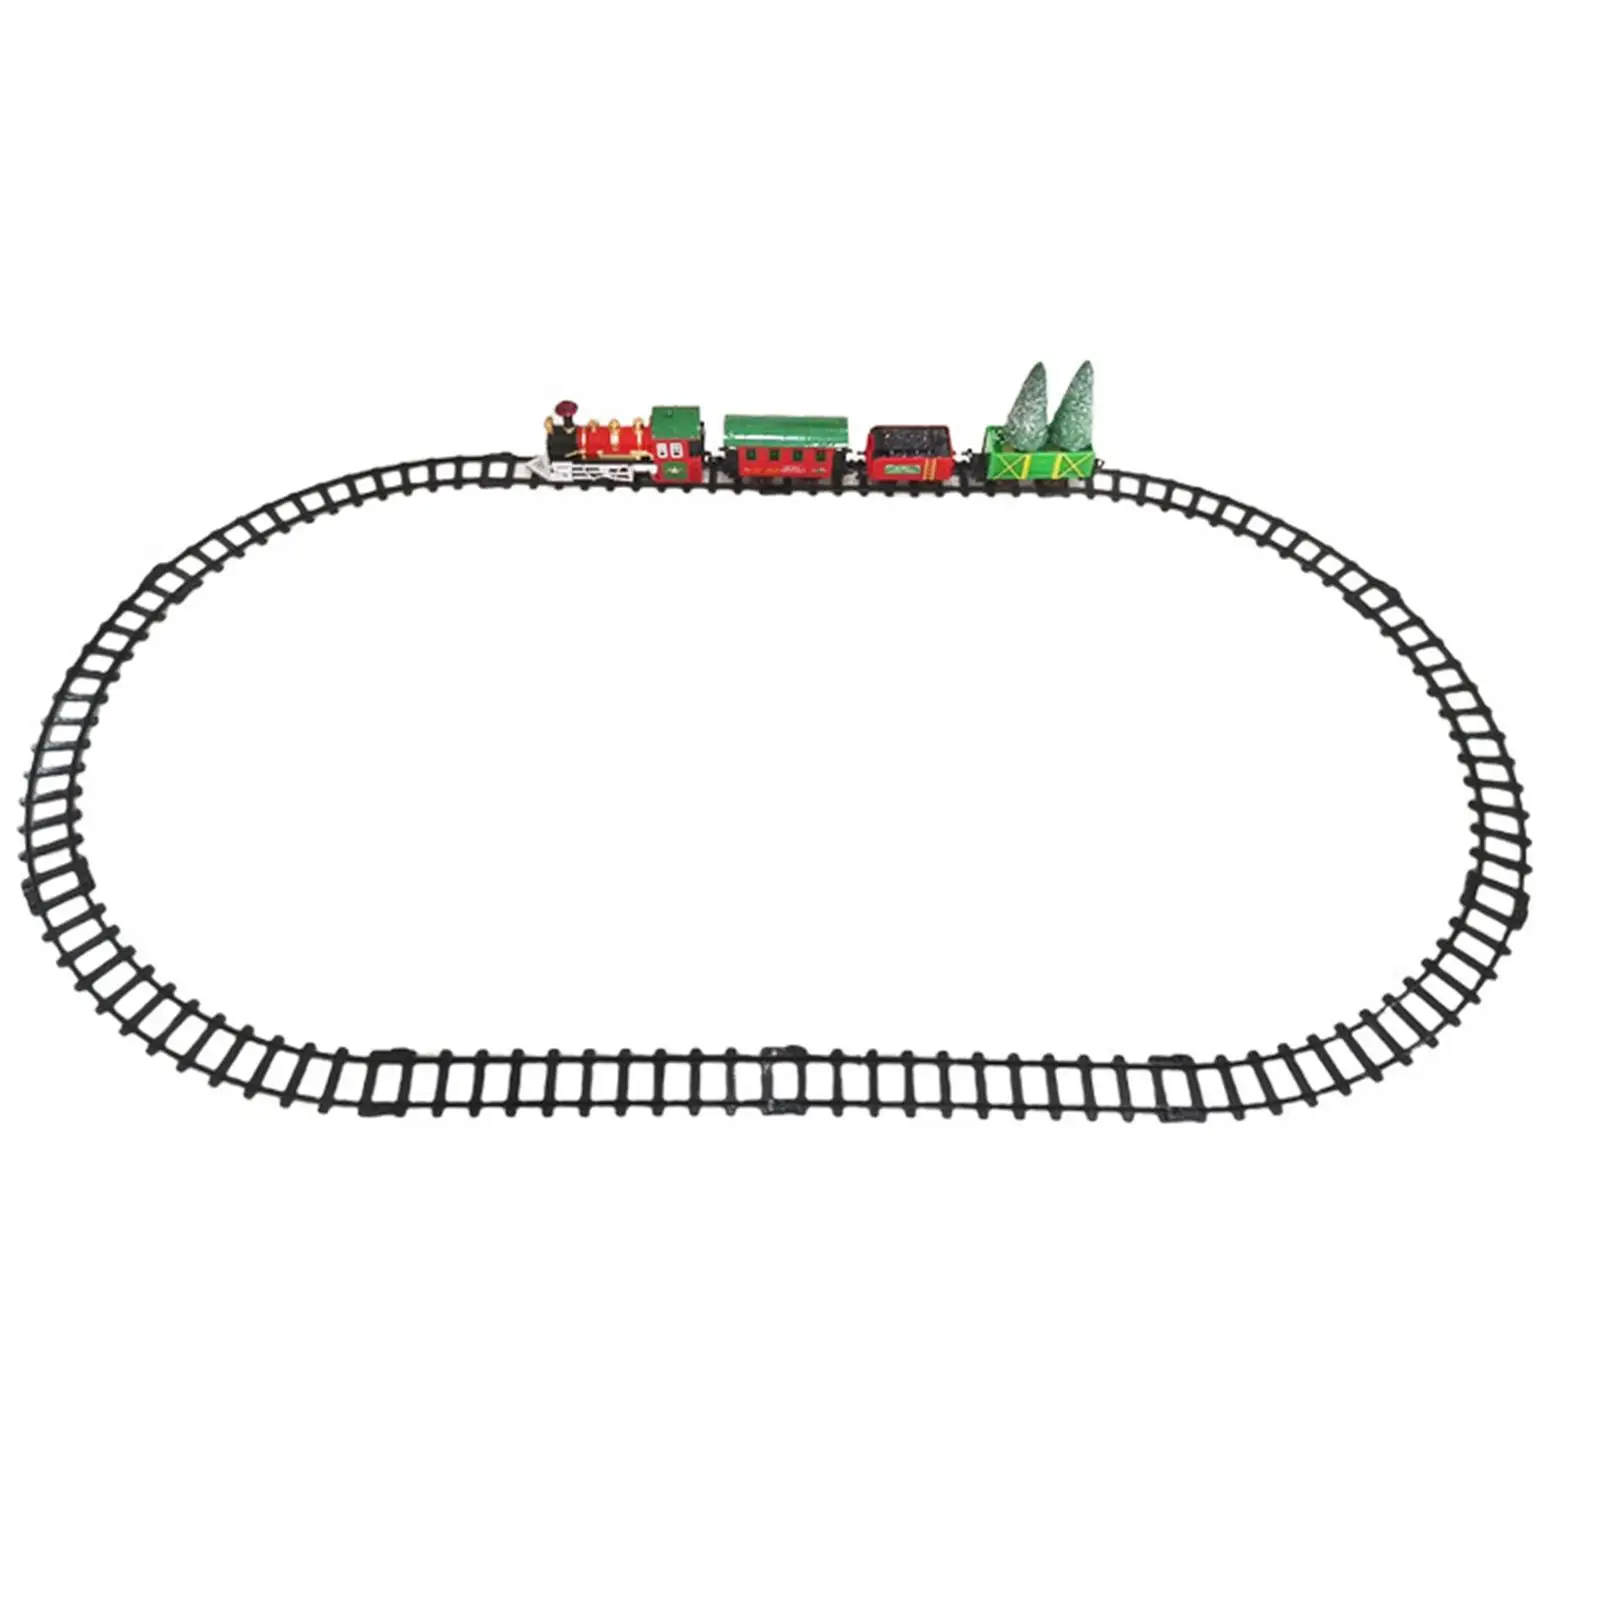 Railway Tracks Kids Toy Electric Train Track for Preschool Toddlers Gifts